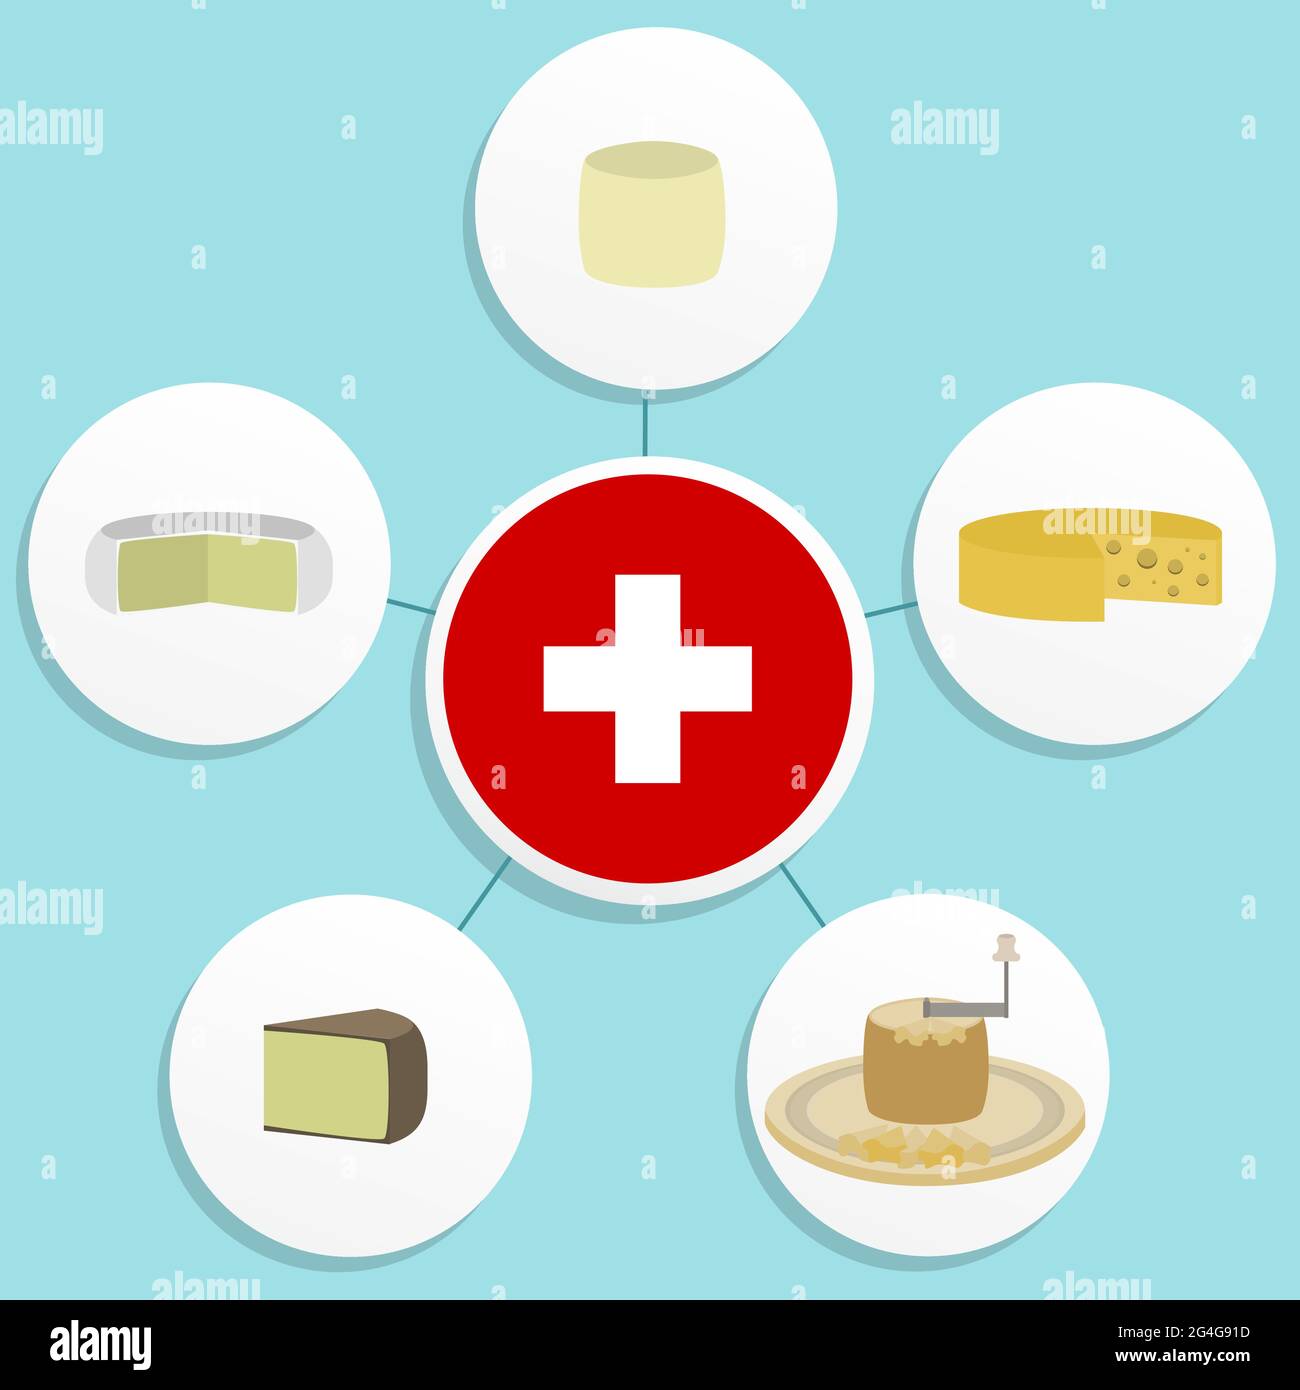 Five famous Swiss cheeses ordered in a diagram. Tomme Vaudoise, emmental, gruyere, tete de moine, petit swiss. Swiss flag in the center. Stock Vector